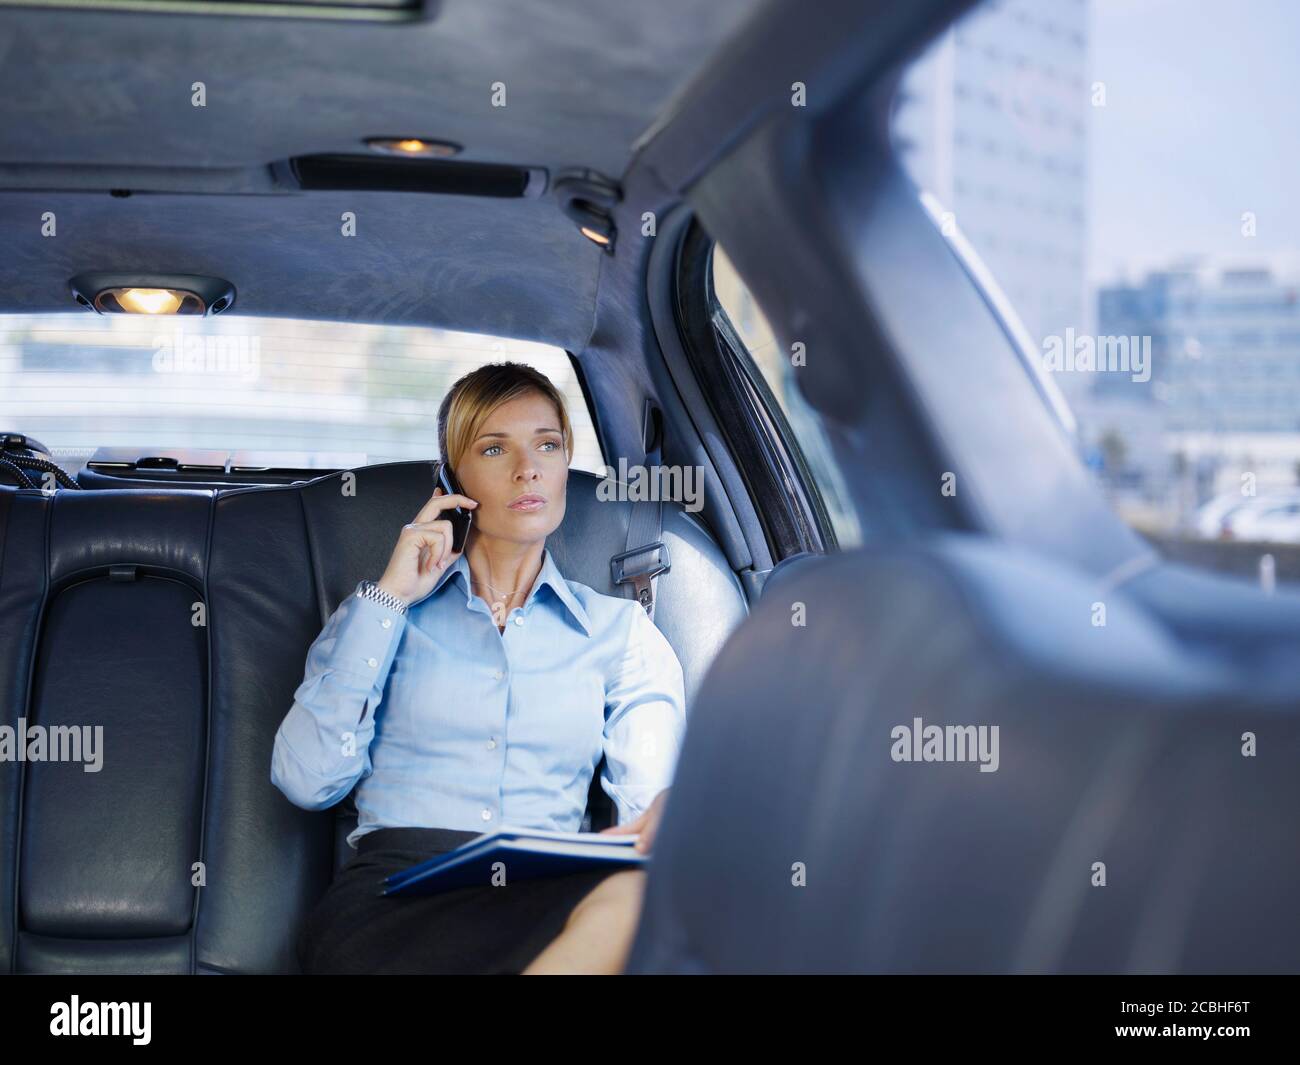 Businesswoman Talking On Mobile Phone Travelling In Limousine Stock Photo